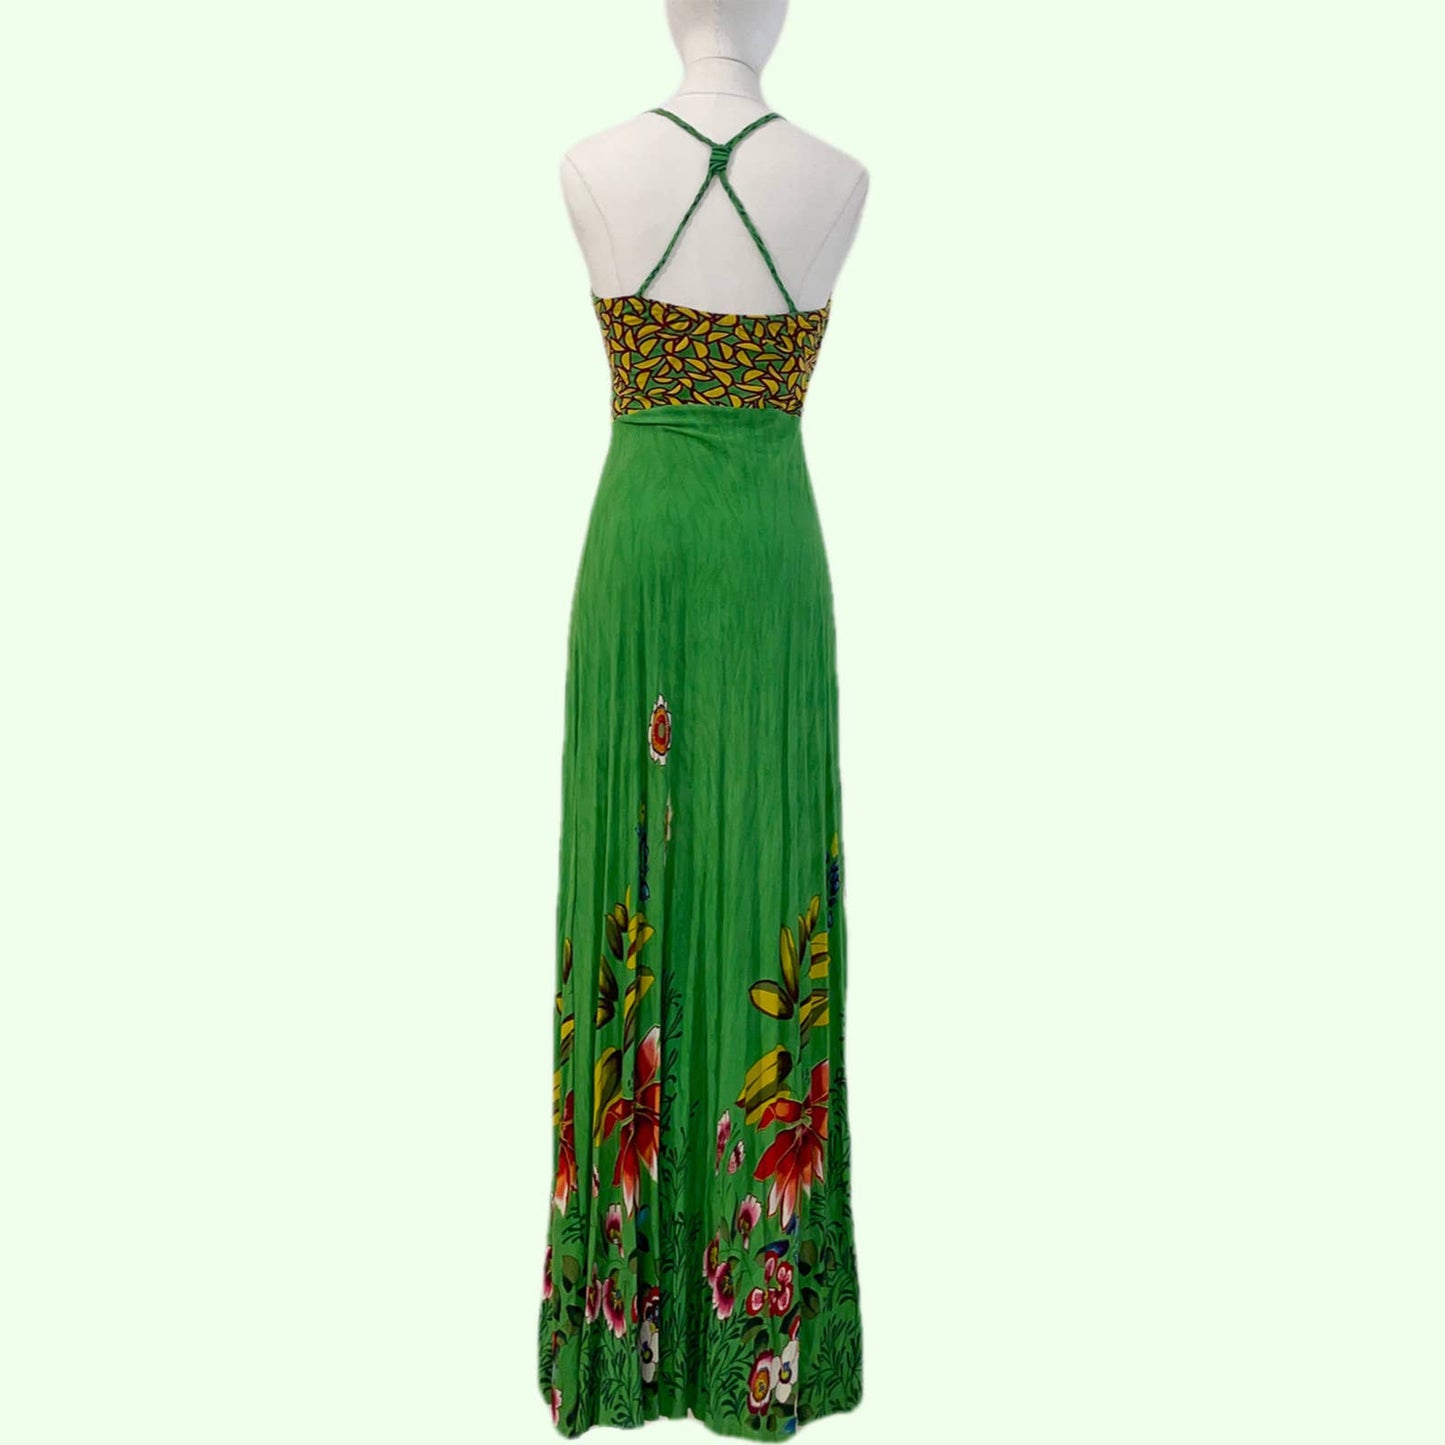 DERHY Green and Yellow Floral Patterned Maxi Dress